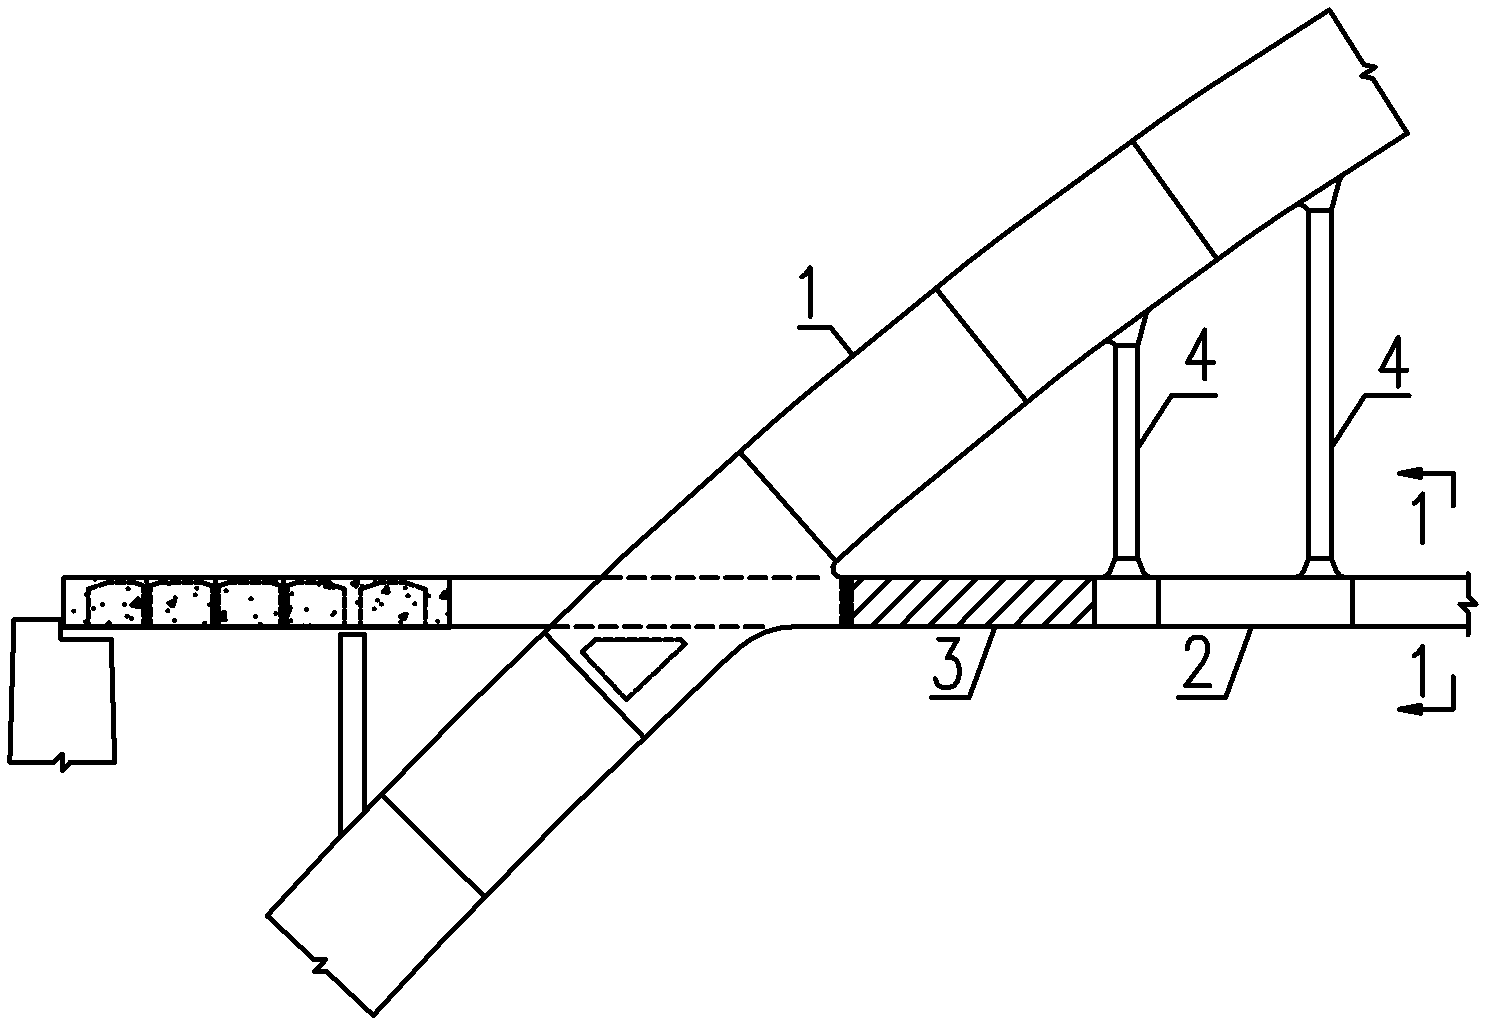 Half-through bowstring arch bridge adopting partial rigid connection mode among arched girders